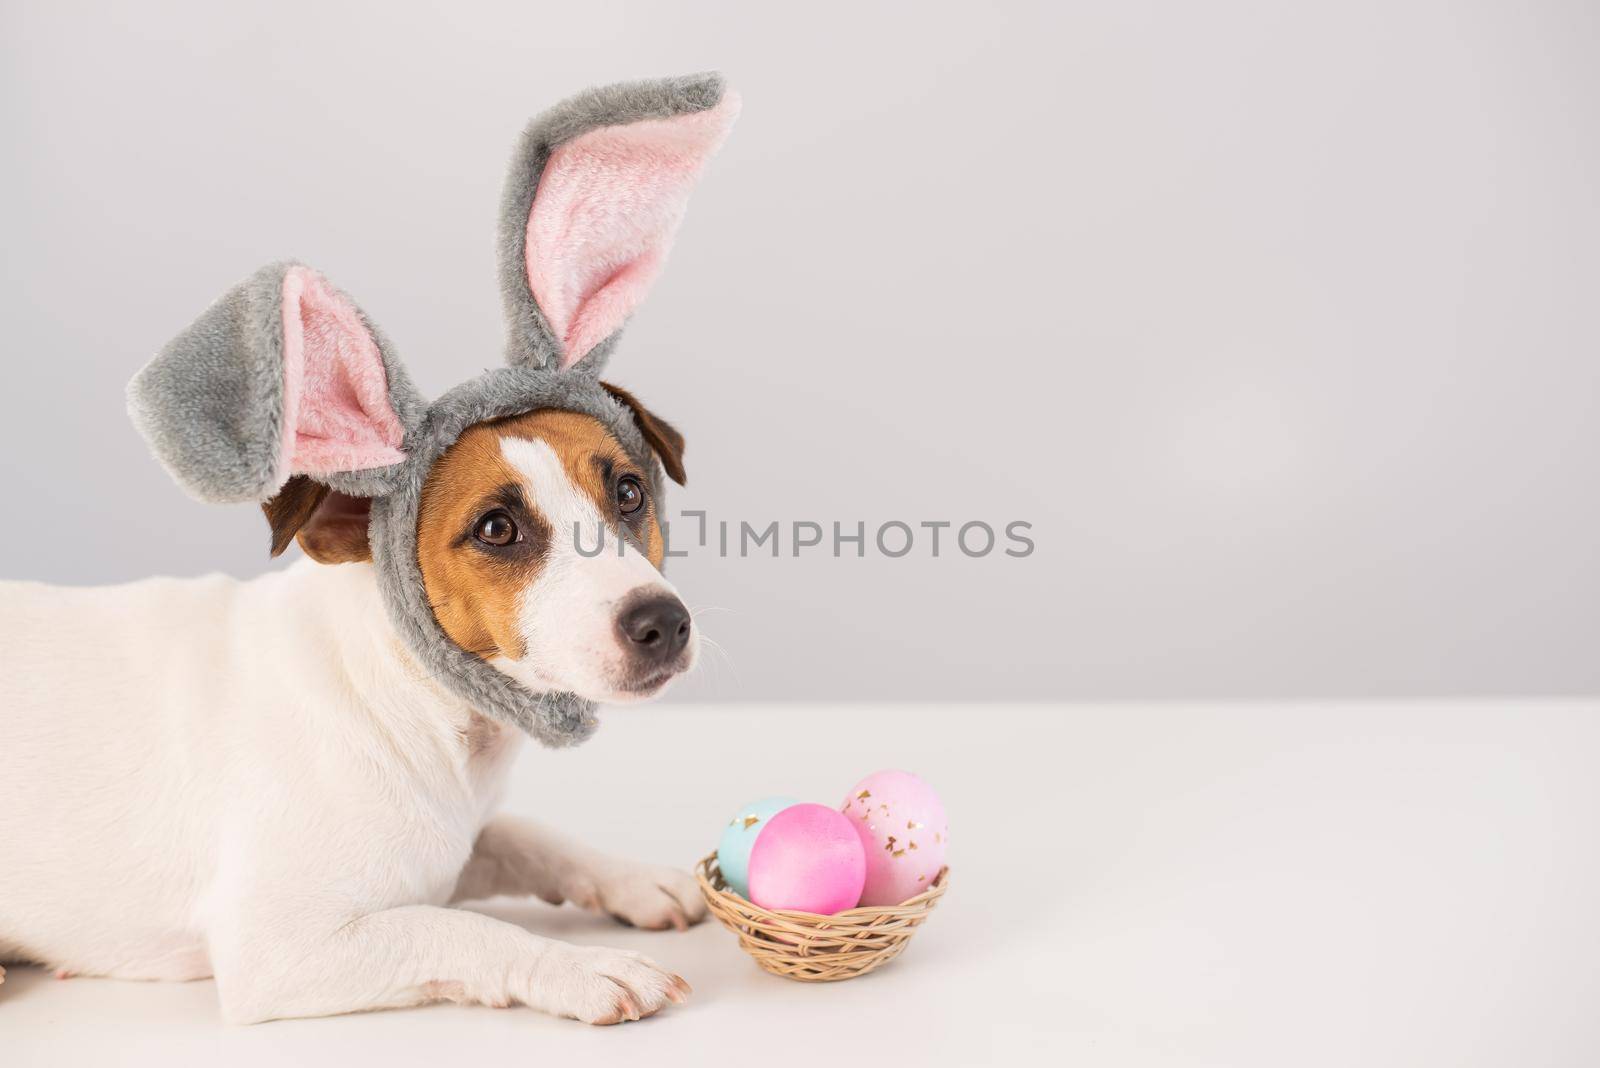 Funny dog Jack Russell Terrier in a bunny costume with a basket of painted eggs on a white background. Catholic Easter symbol.